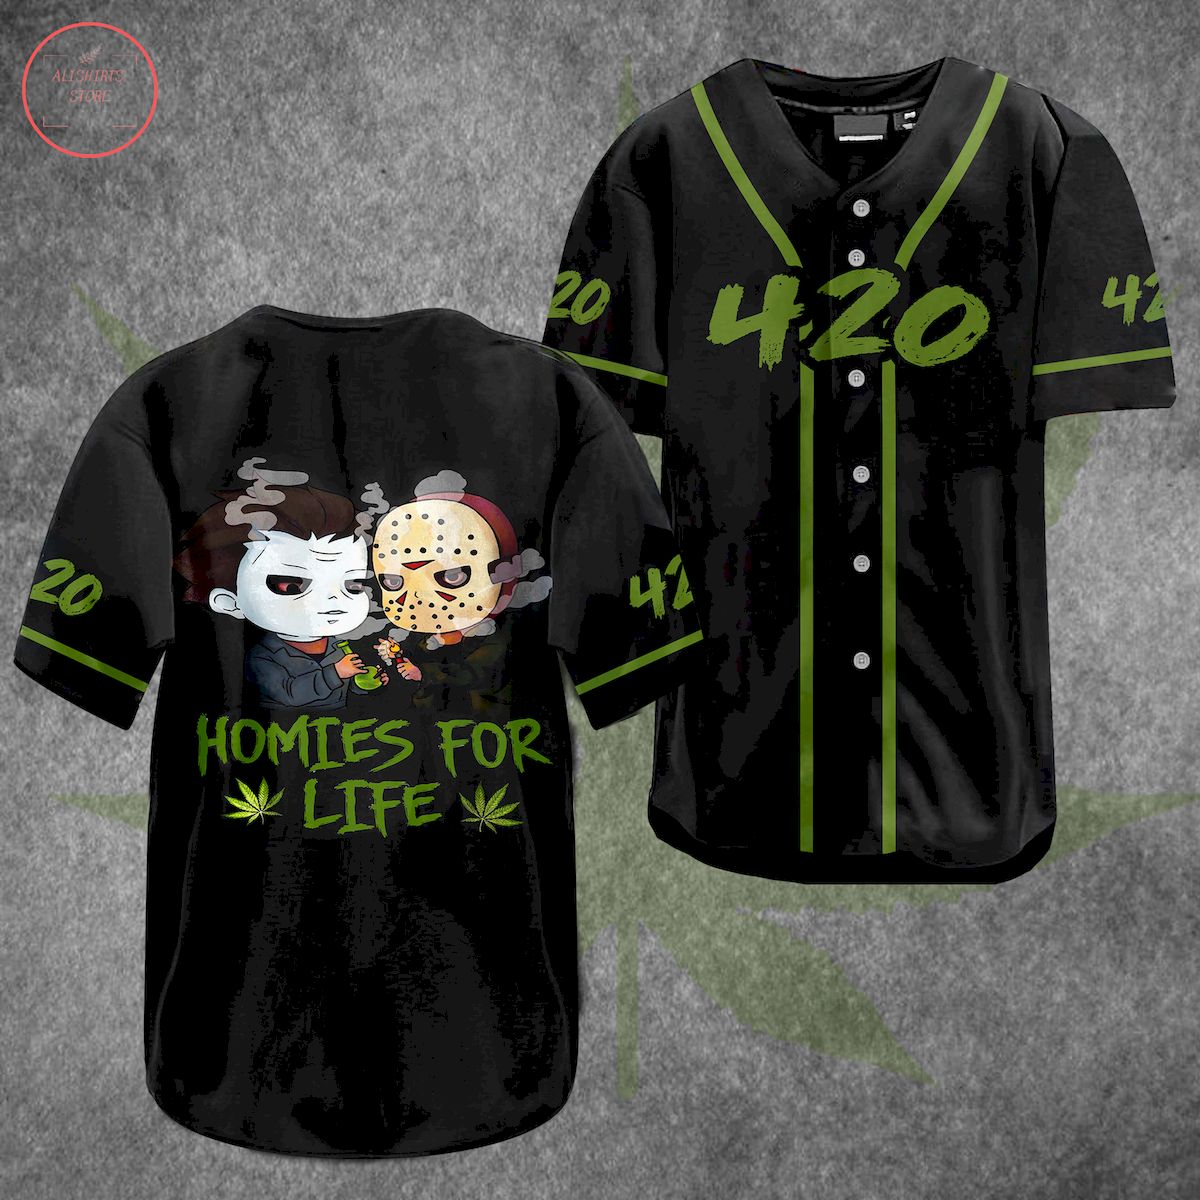 Weed Homie For Life Baseball Jersey